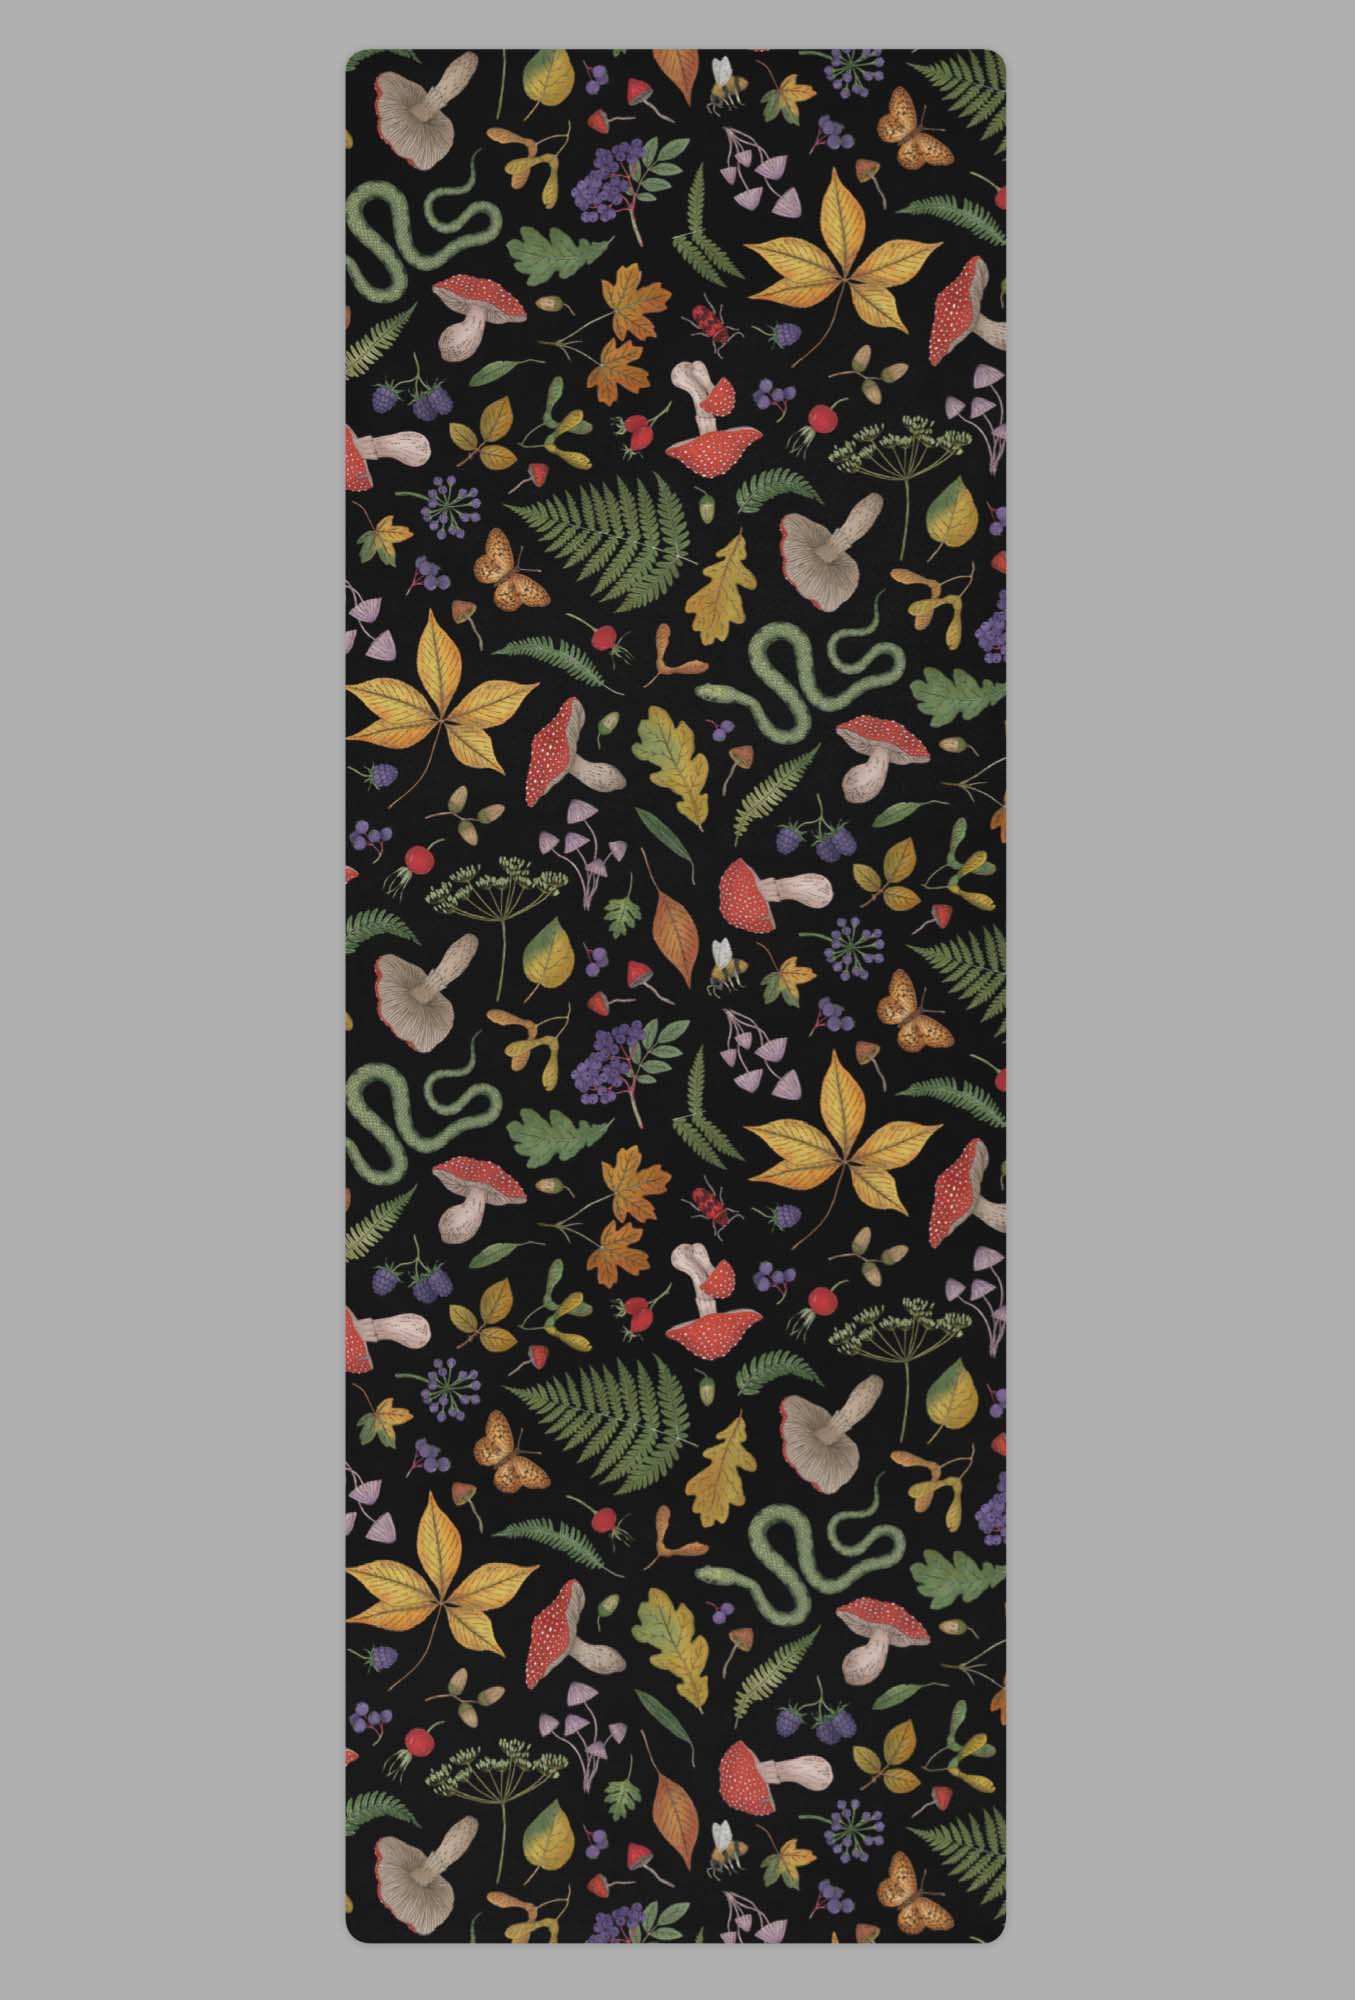 cosmic drifters hedge witch print yoga mat